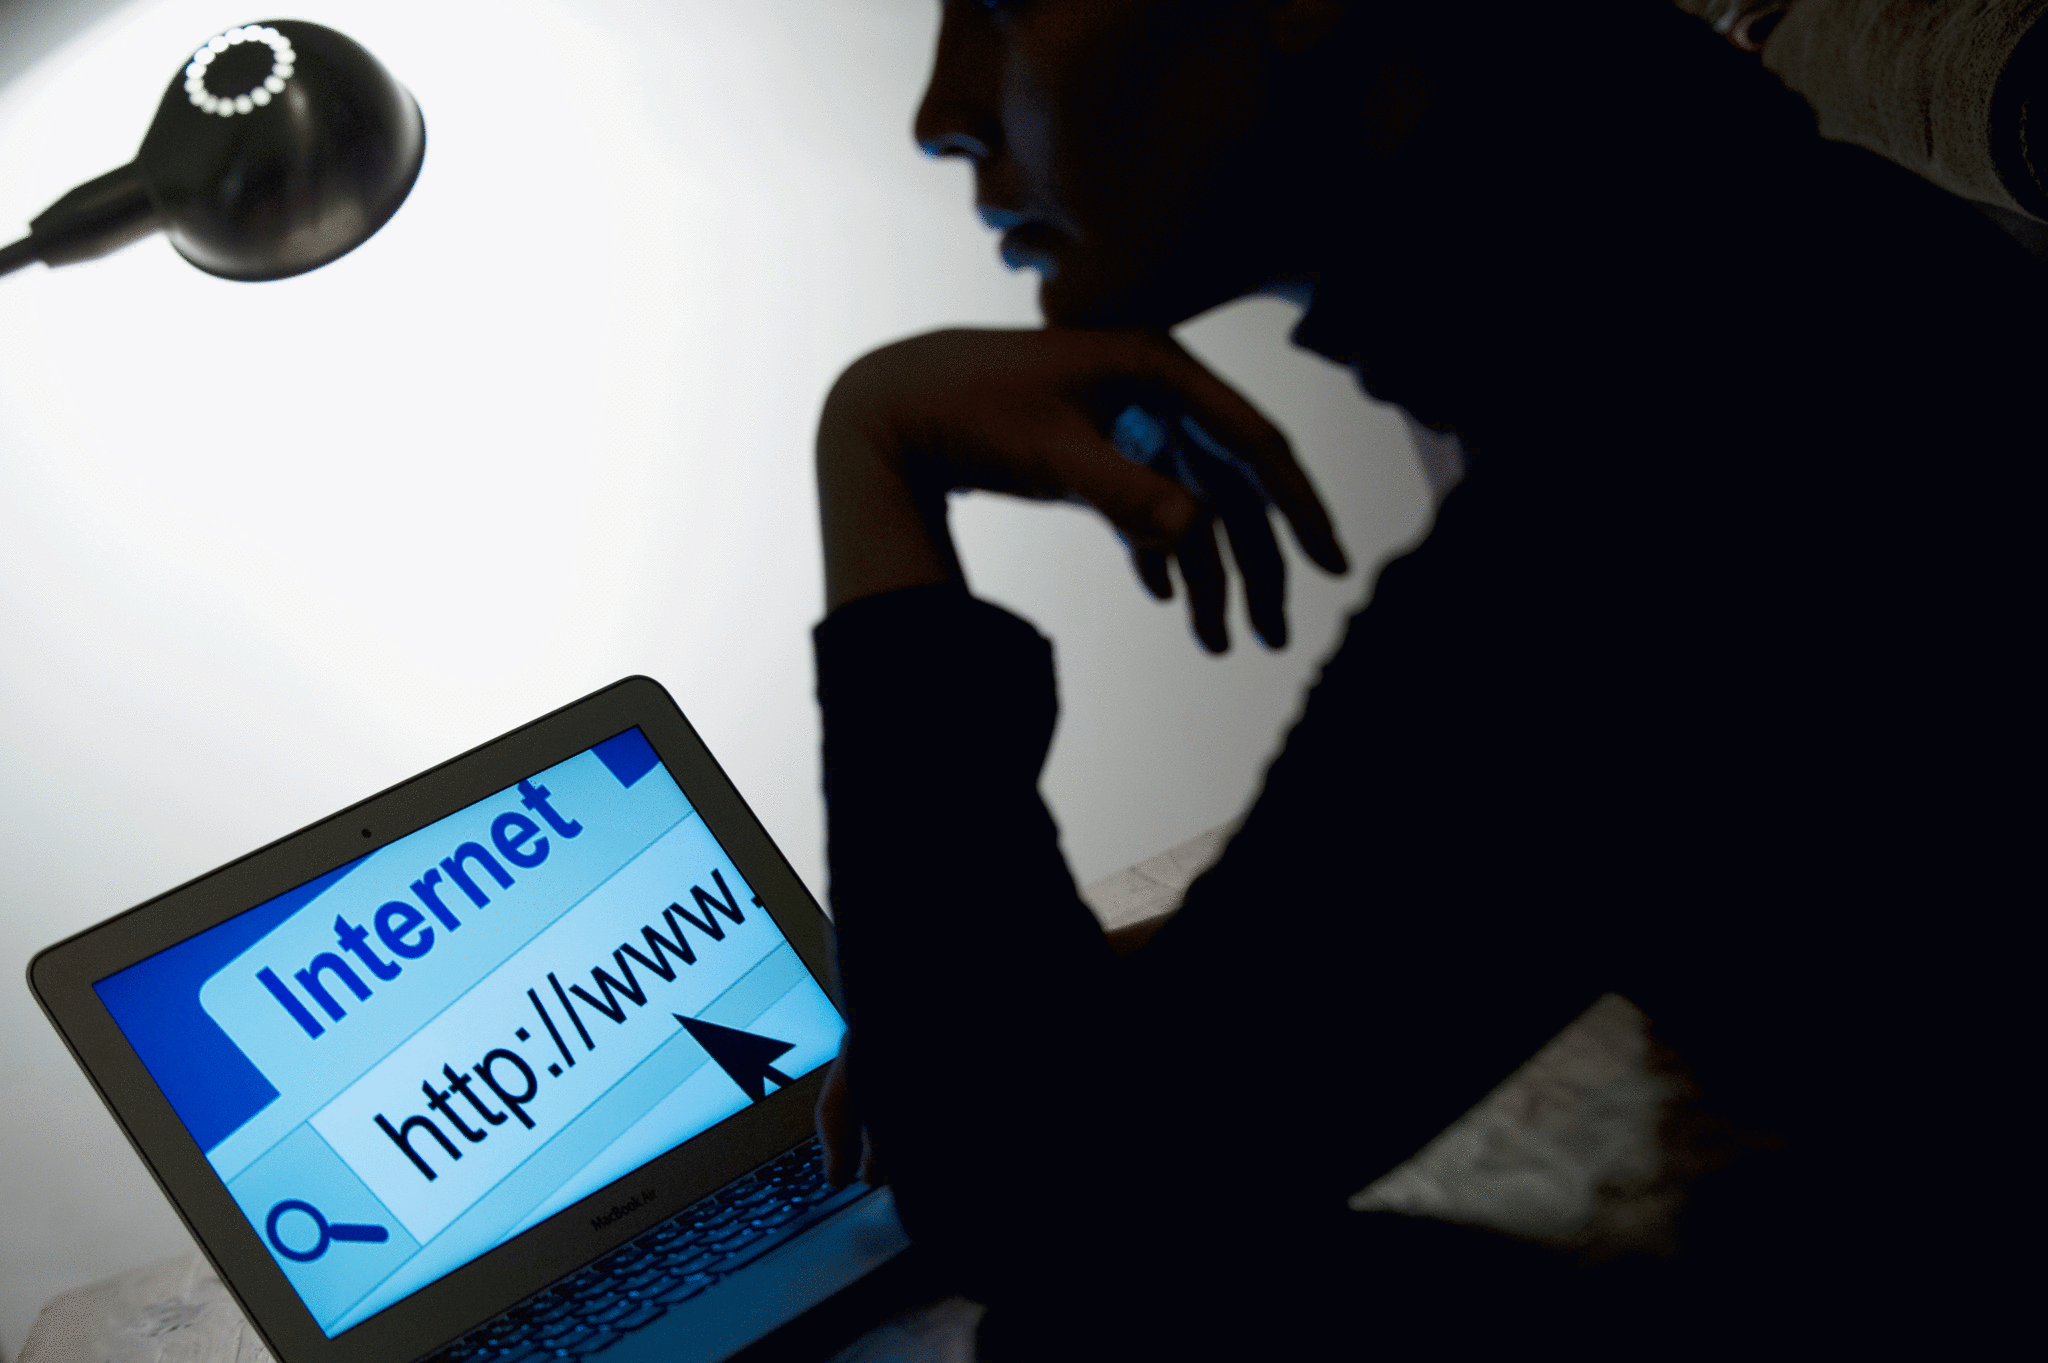 Cyberbullies Anti Trolling Website Launched To Help Victims The Independent The Independent